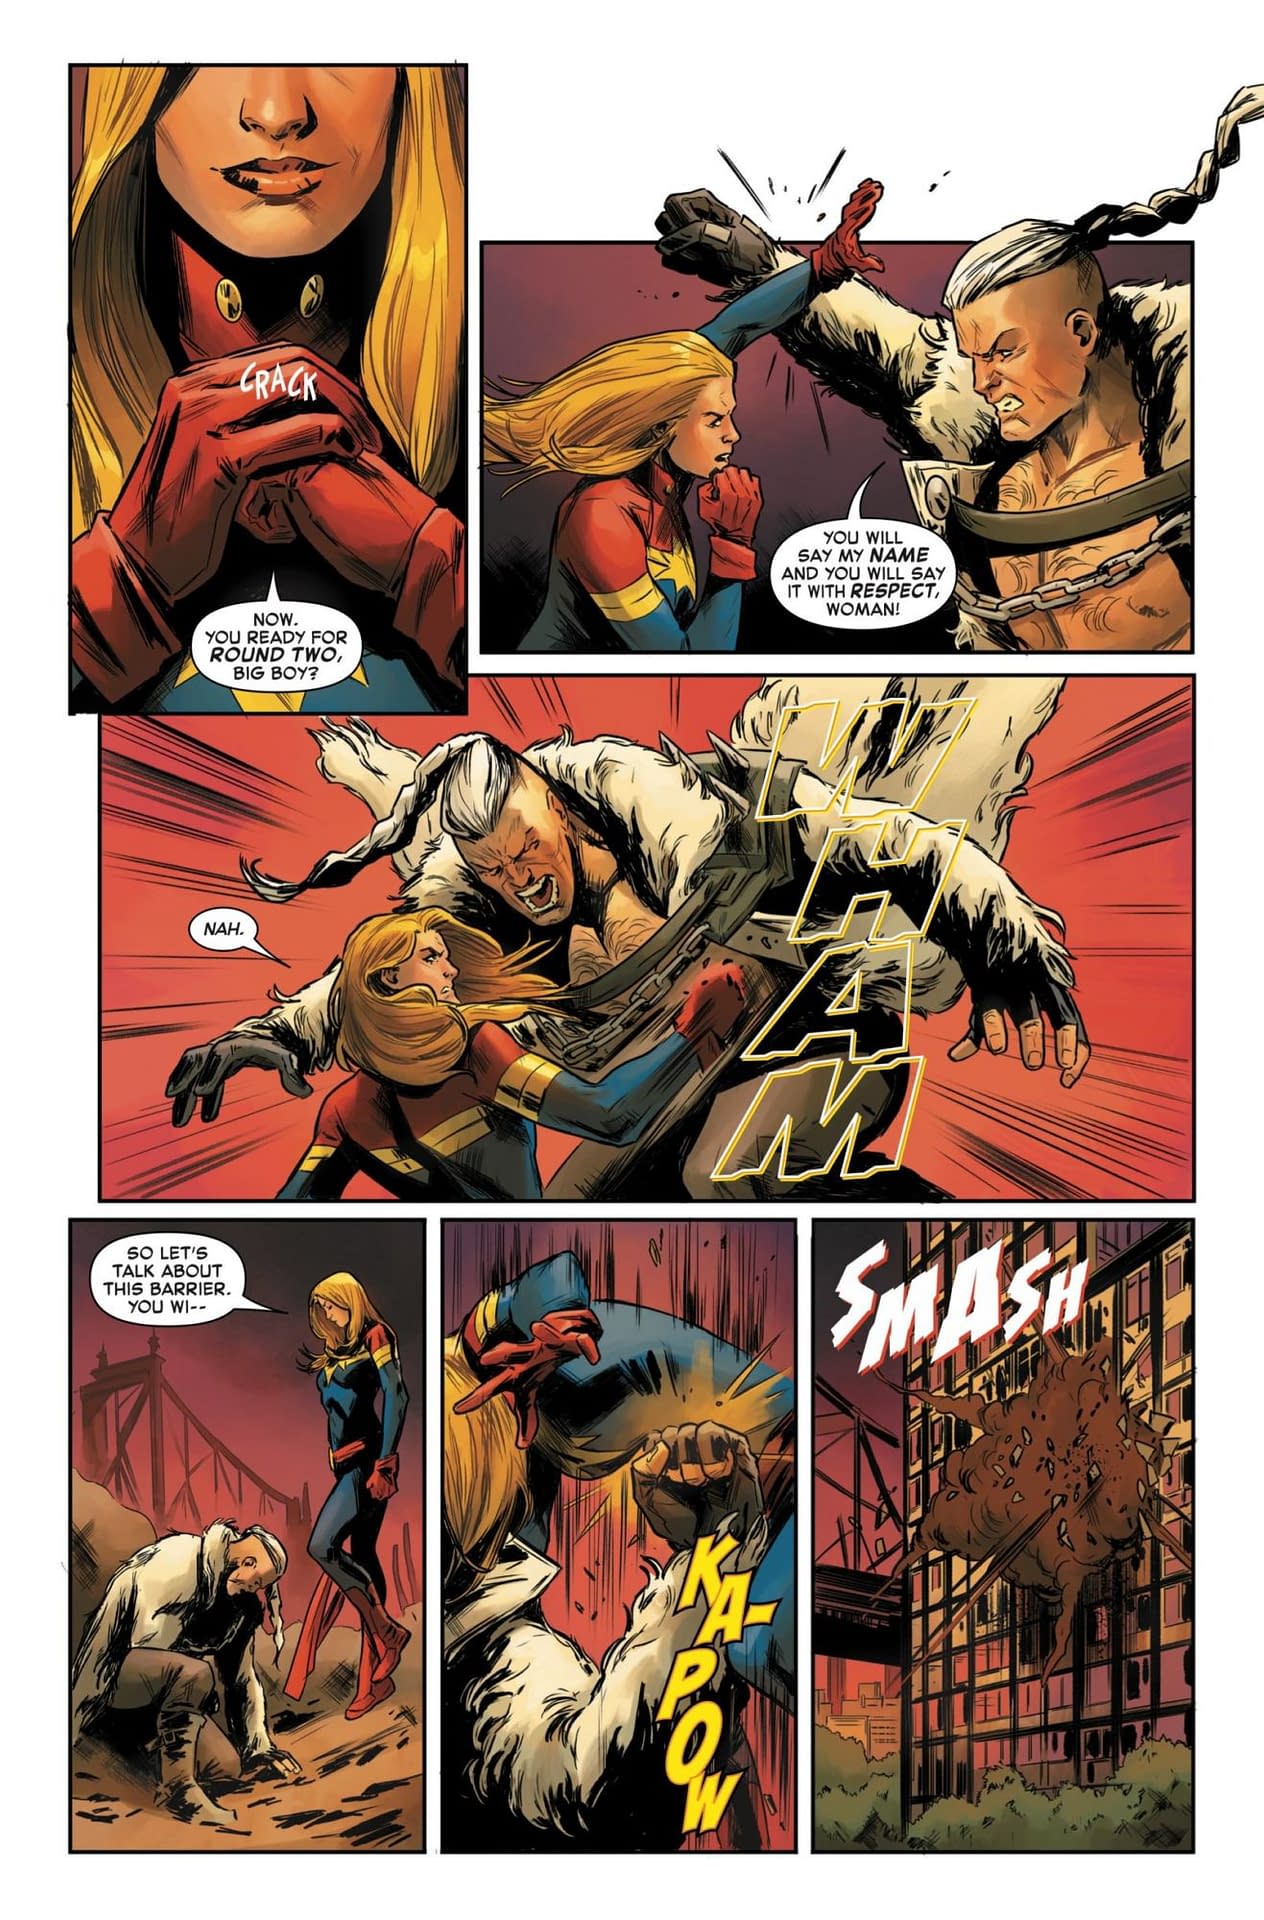 Sightings of Thor's Naughty Parts in This Week's Captain Marvel #2 Preview